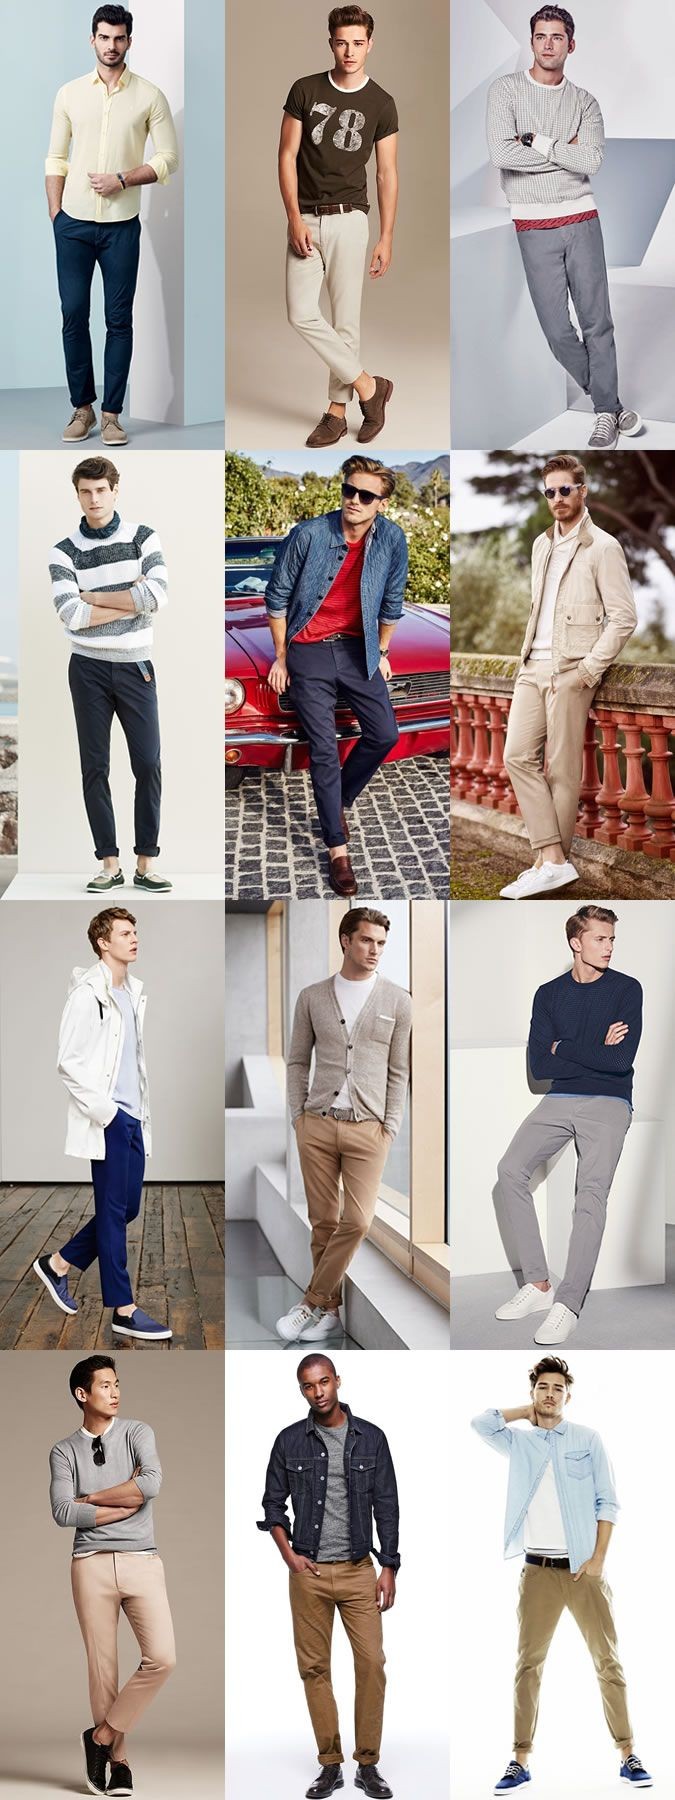 2015 Spring/Summer Men's Chinos Guide: Casual Styl...